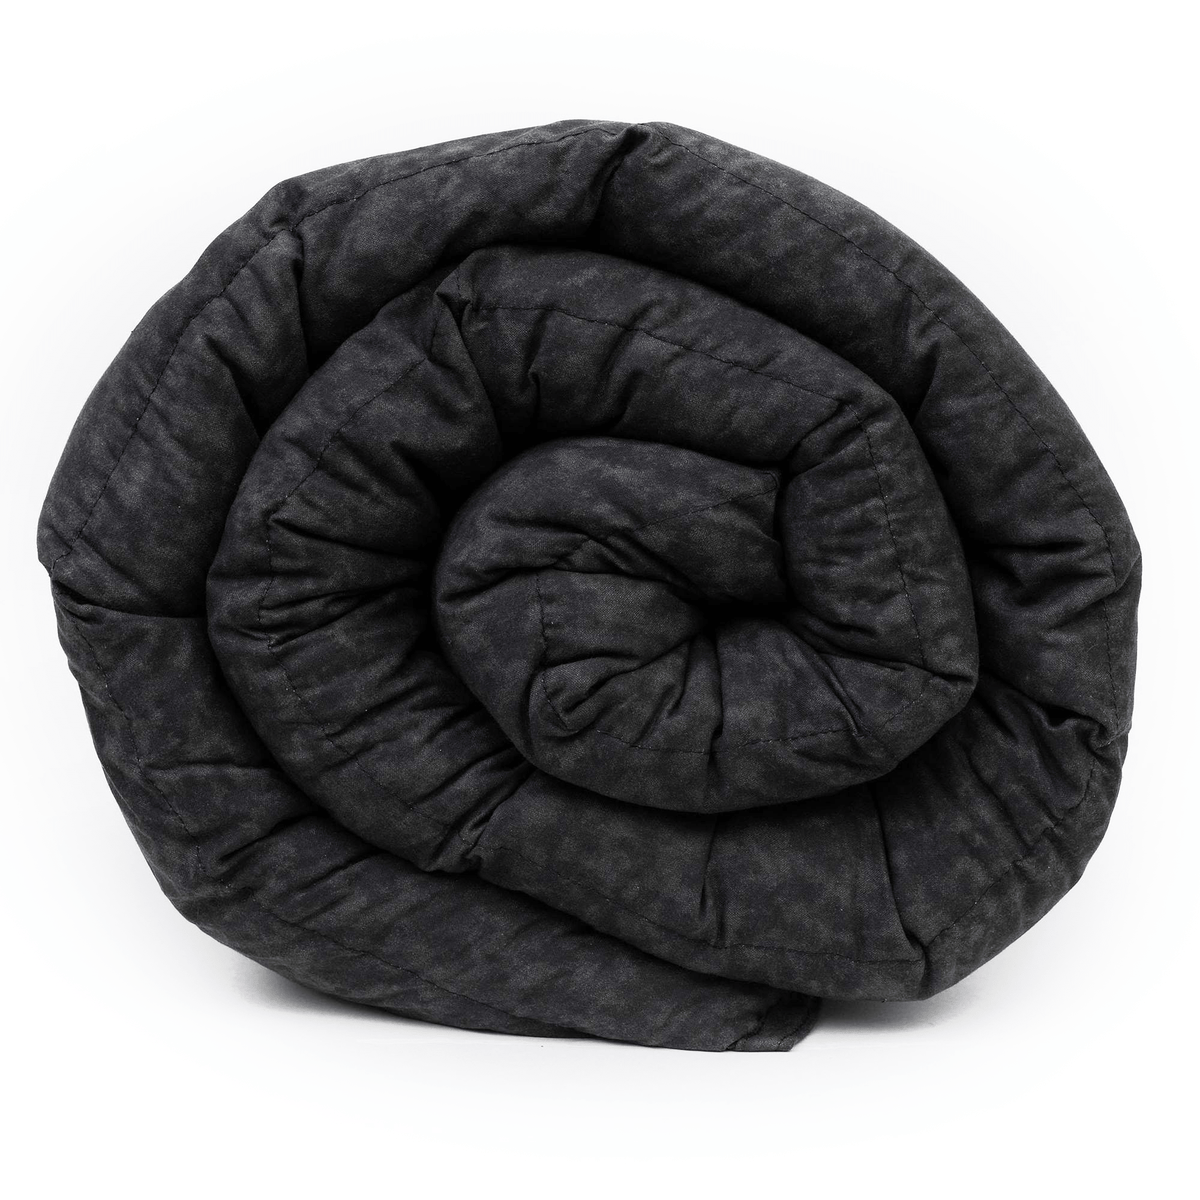 Mosaic Weighted Blankets Black Cotton Weighted Blanket TWIN